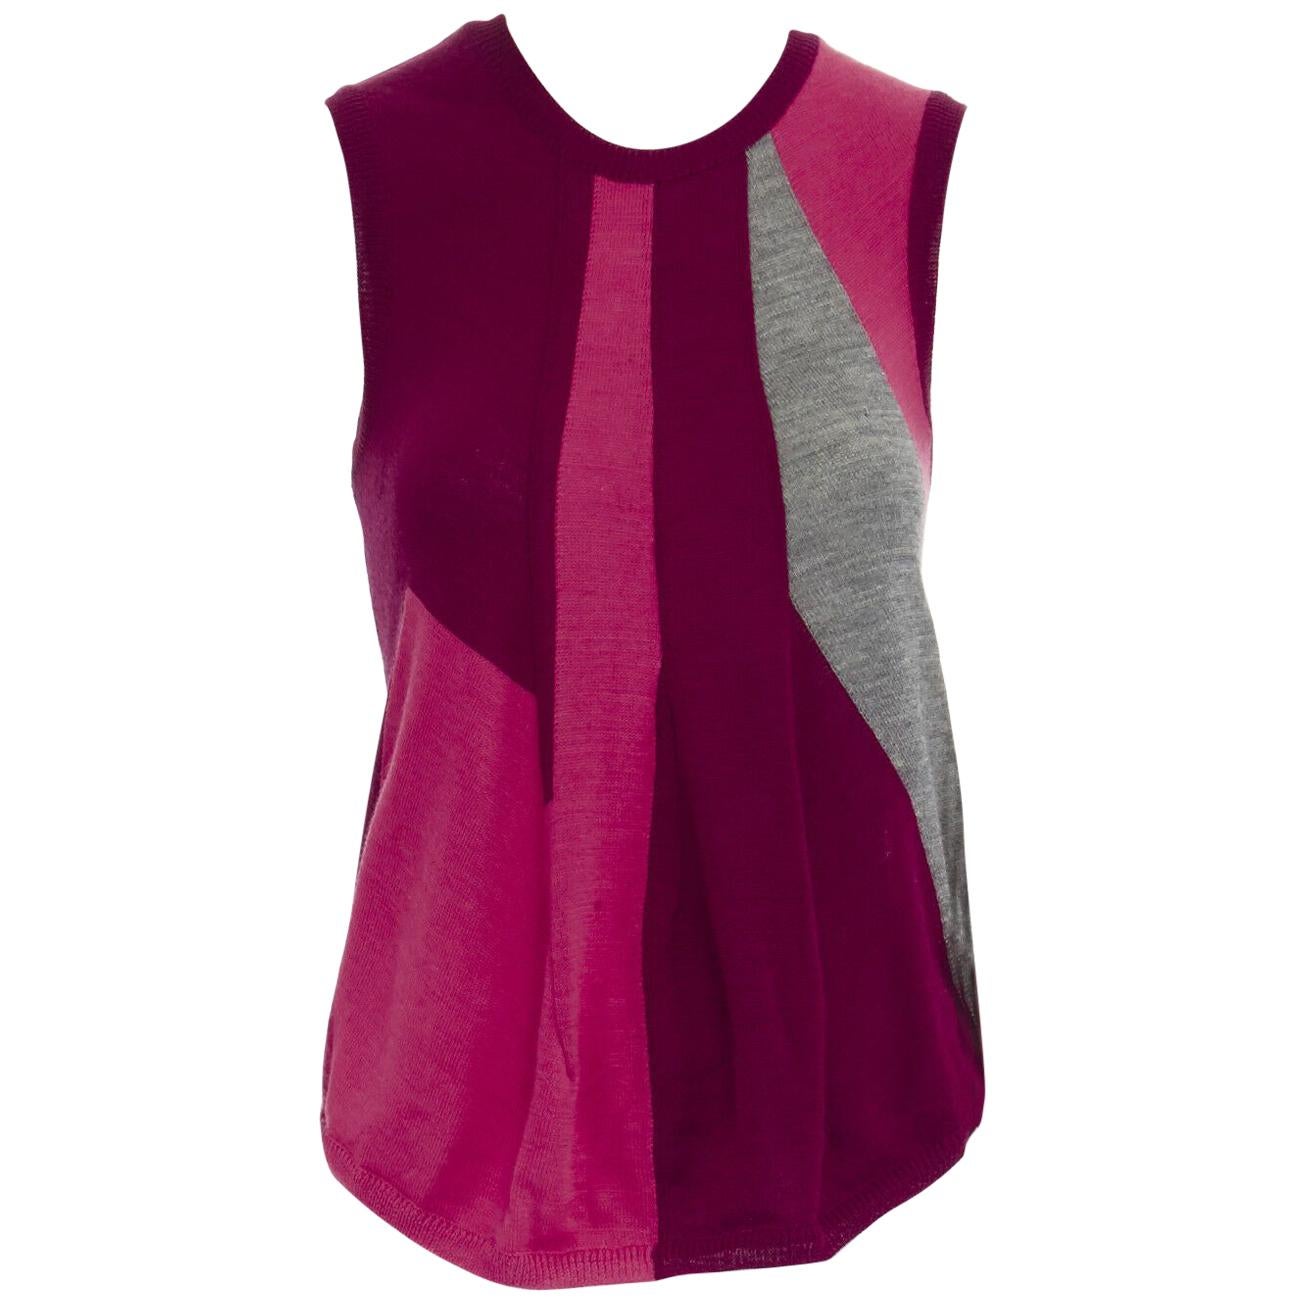 COMME DES GARCONS AD1995 pink maroon grey colorblocked draped knitted vest S